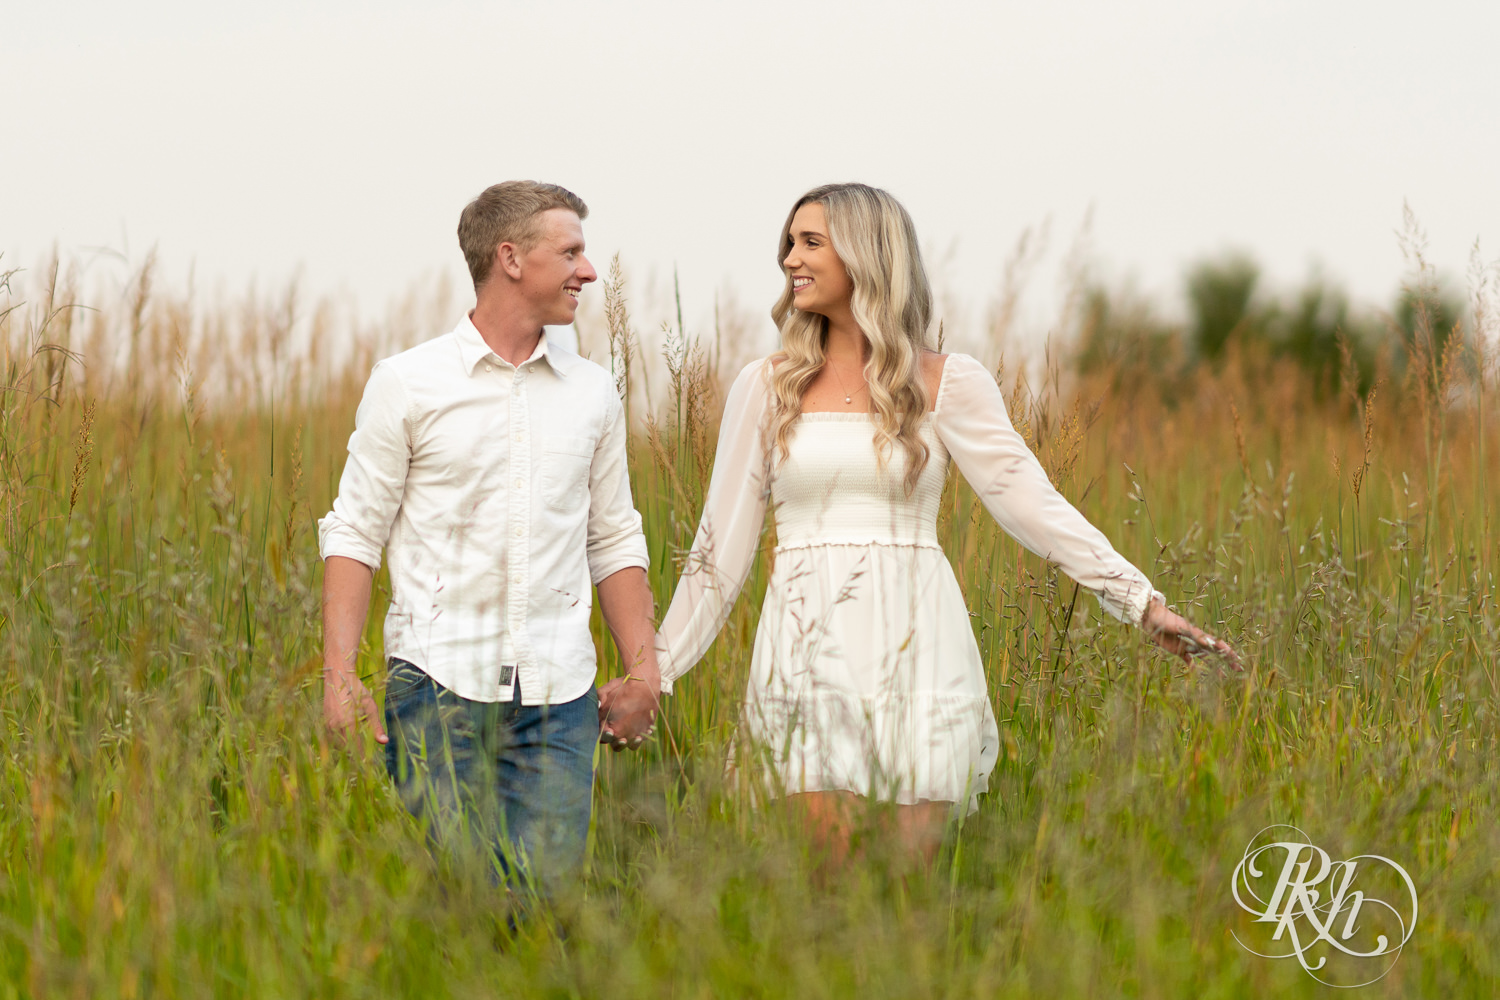 Man and woman in white and cowboy boots smile in open field engagement photos at Lebanon Hills Regional Park in Eagan, Minnesota.